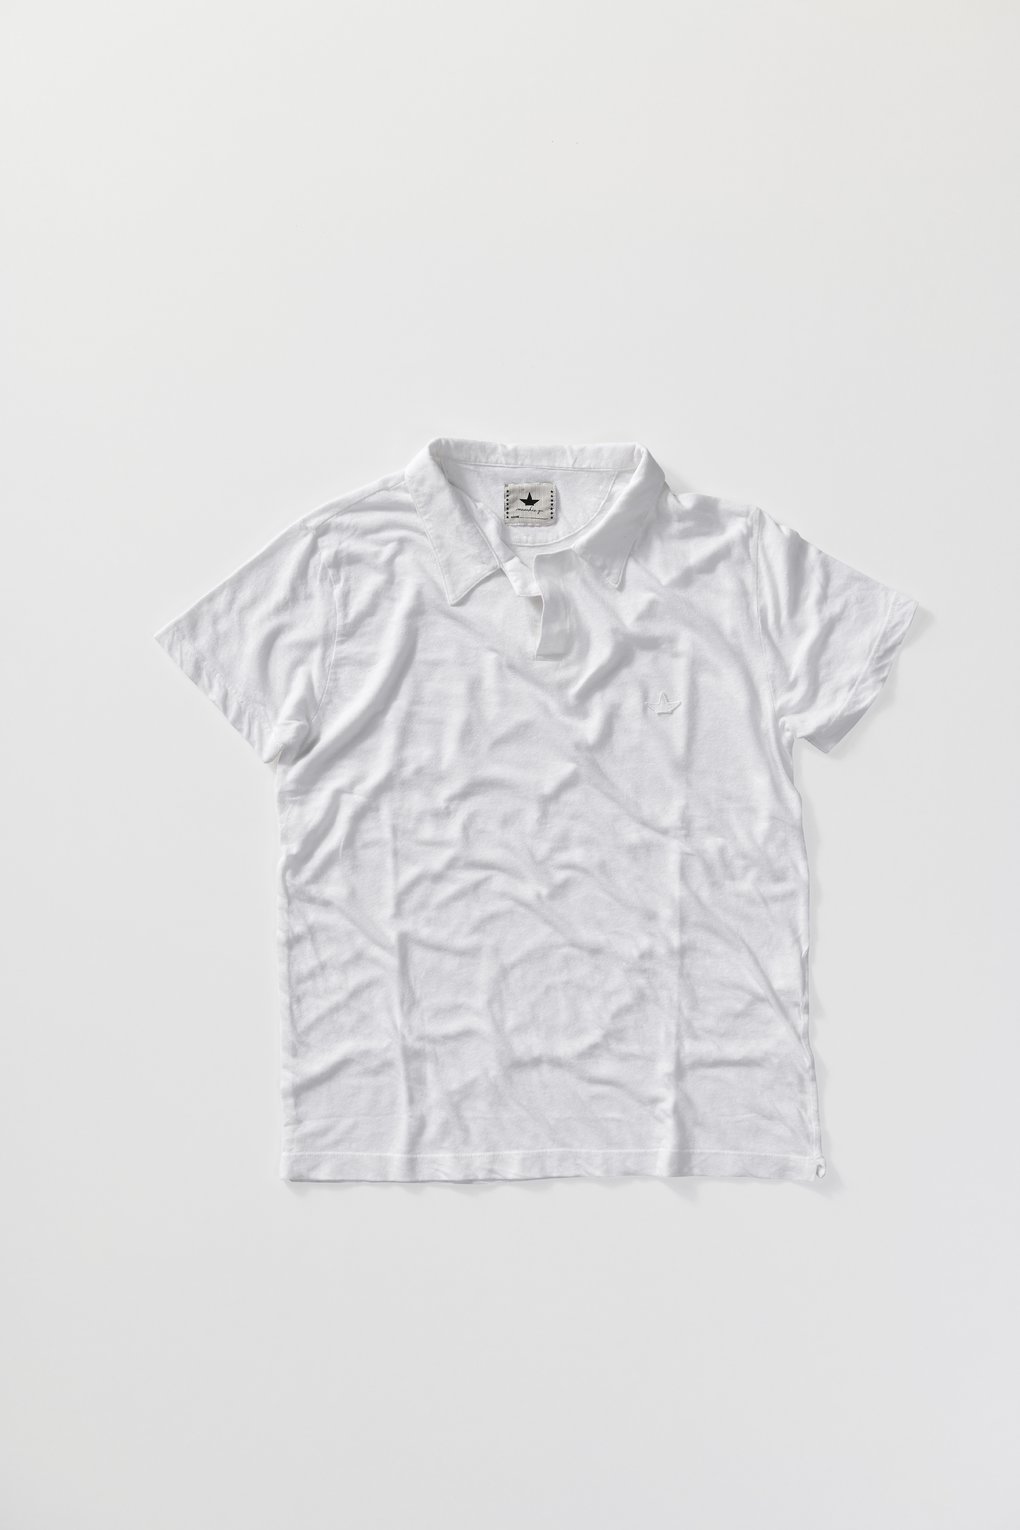 Polo T-shirt in jersey in linen cotton blend